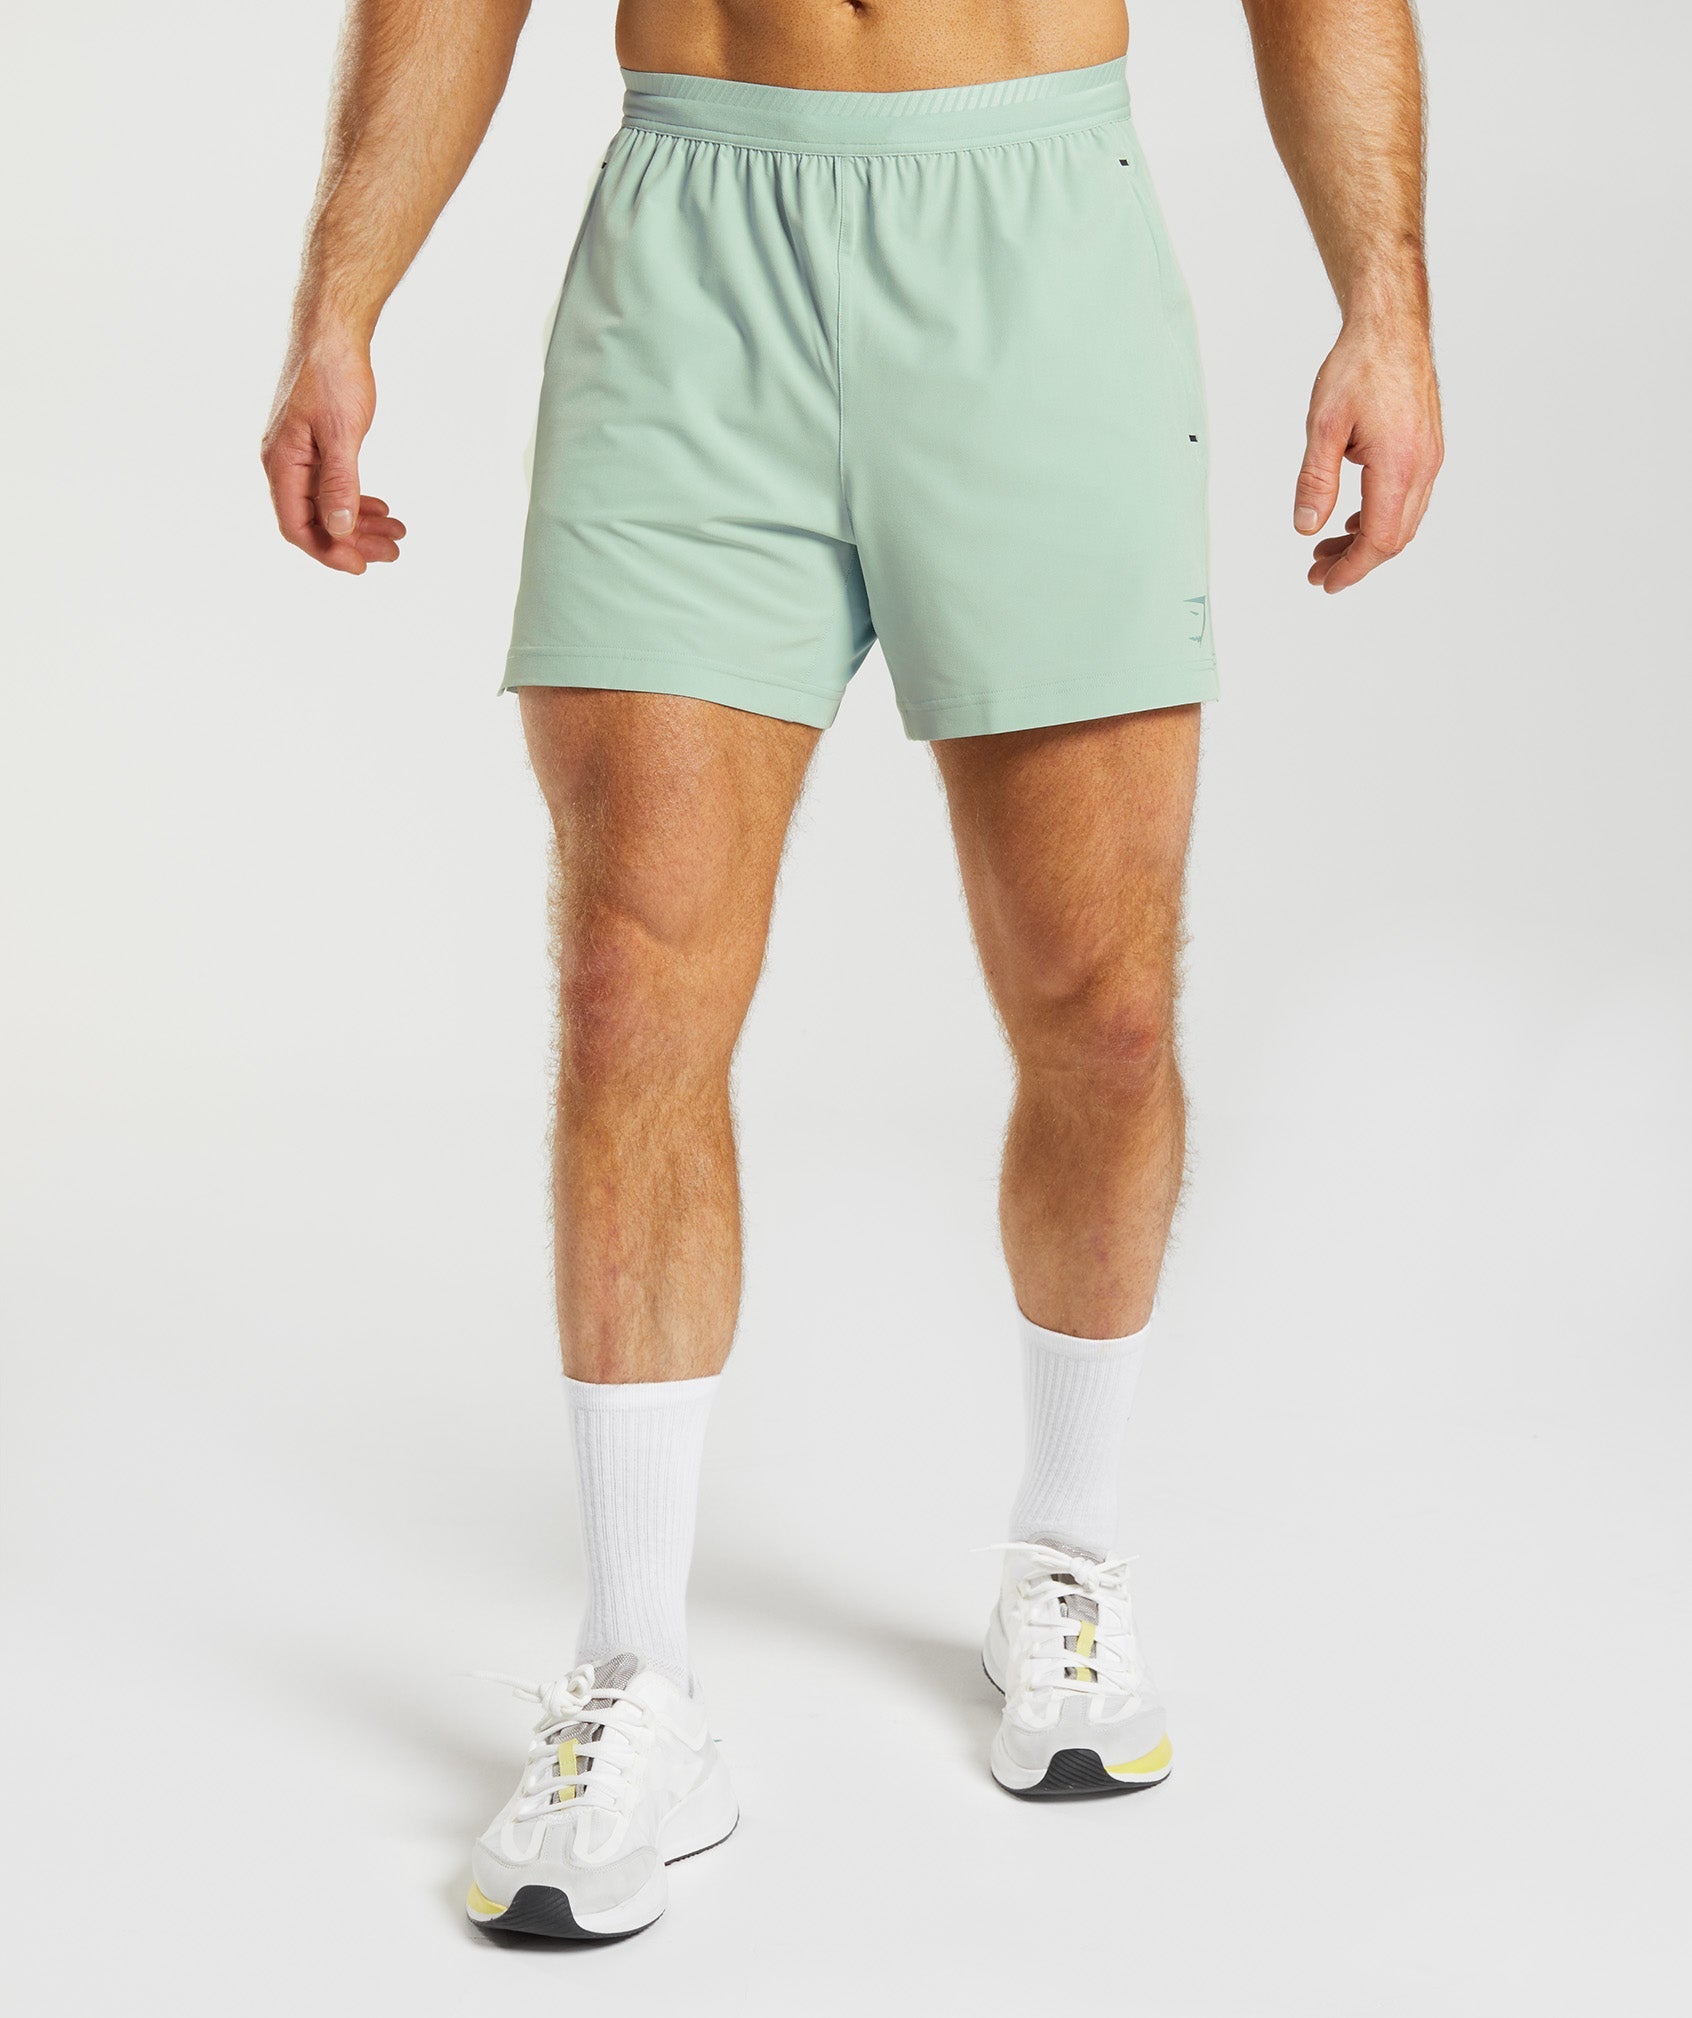 Apex 5" Hybrid Shorts in Frost Teal